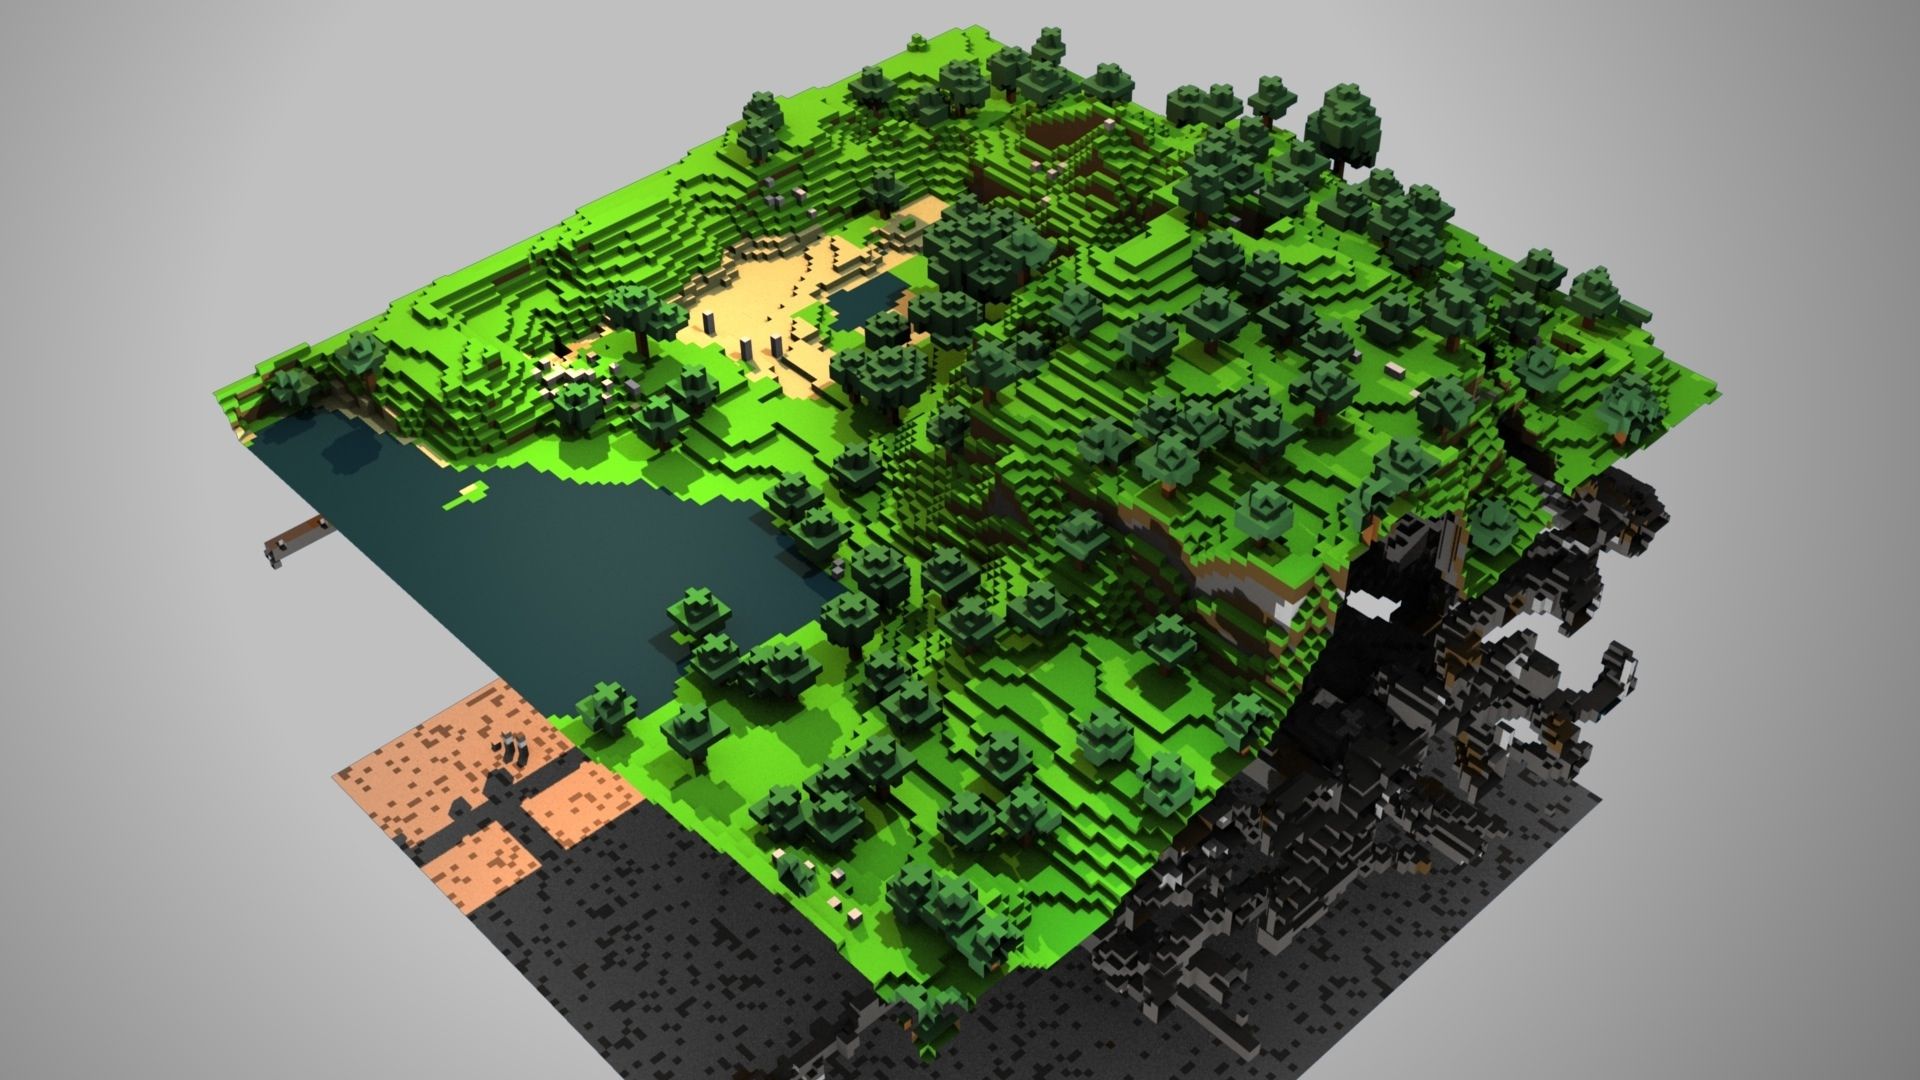 Download Wallpaper 1920x1080 Minecraft, Ground, Trees, Lake Full ...